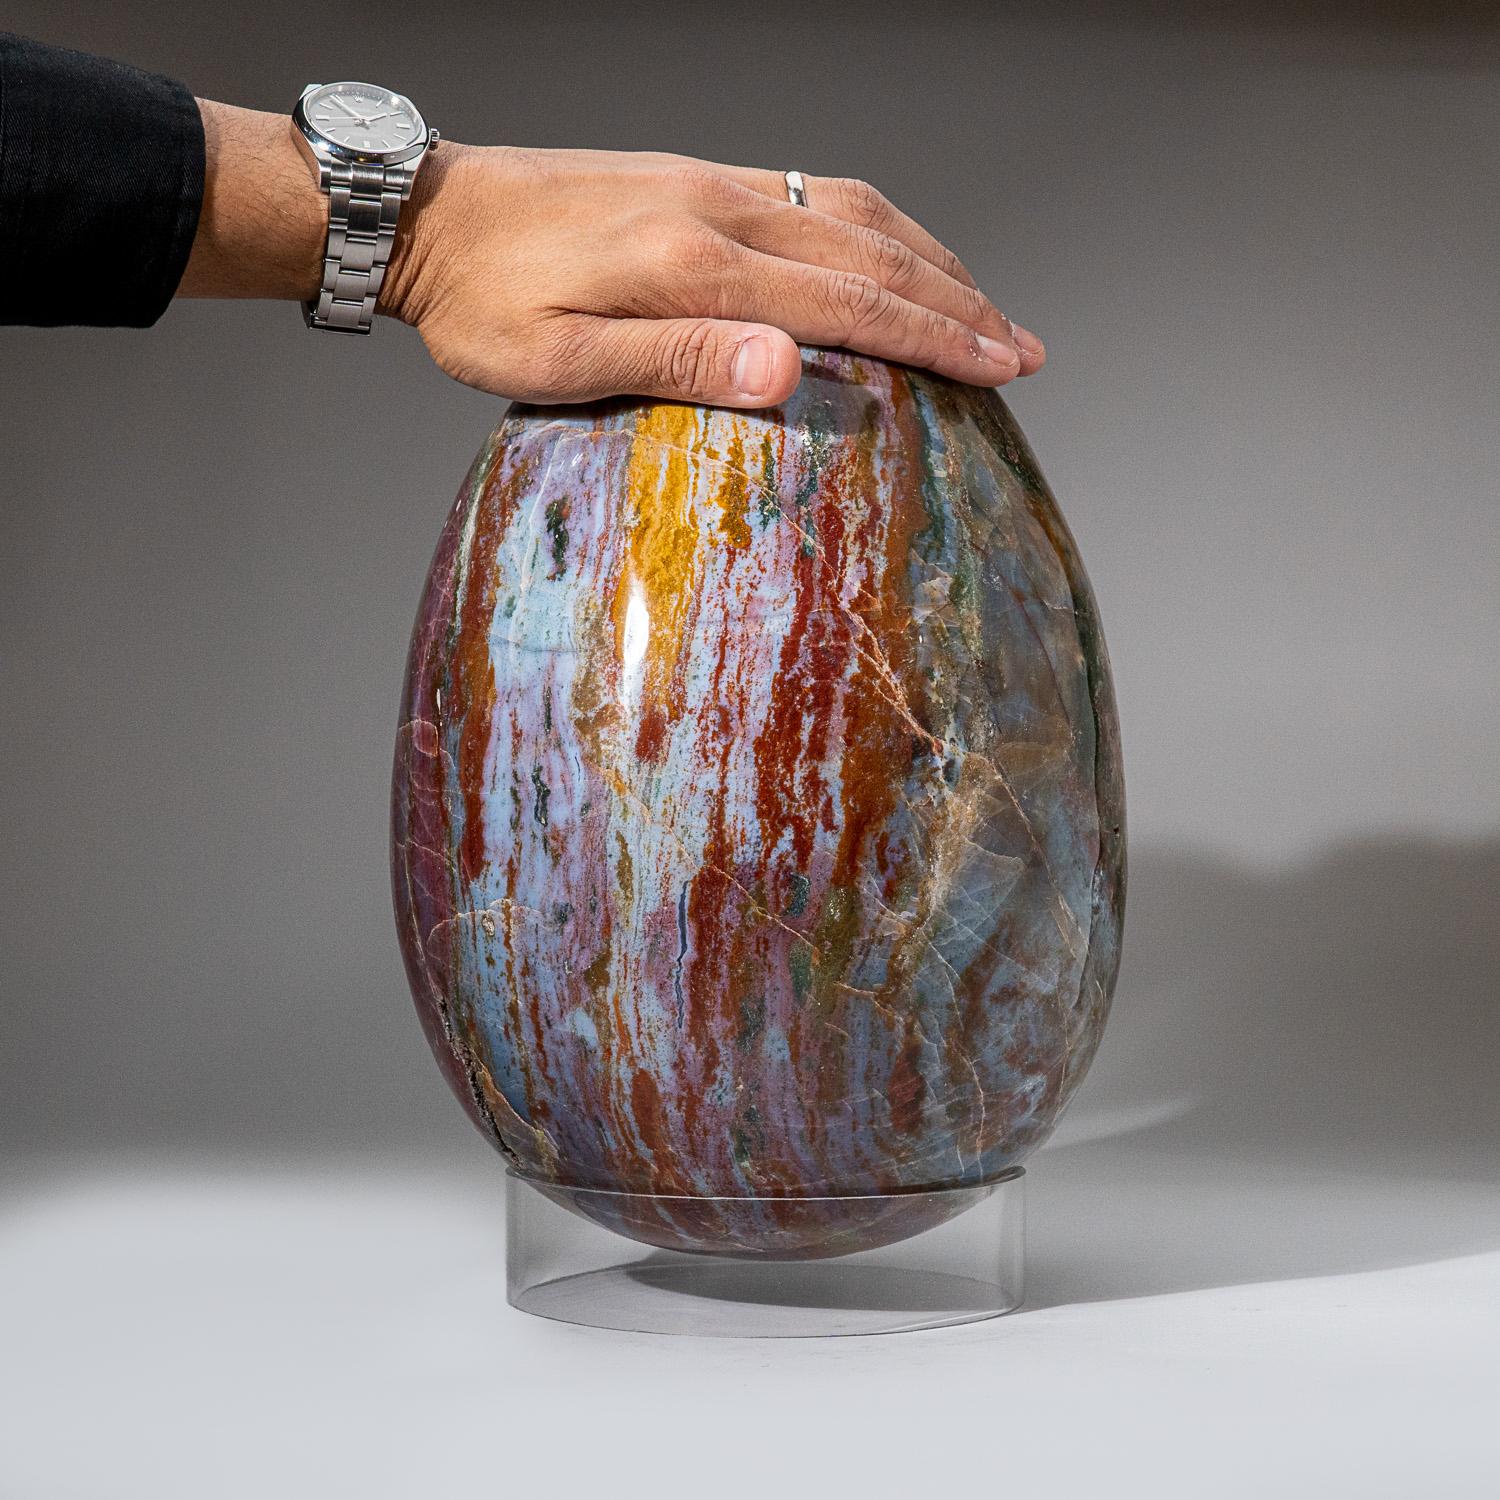 This massive, top-quality polished Ocean Jasper egg from Madagascar, showcases a captivating pattern of blue, red, orange and green hues. This beautiful piece comes with an large acrylic display stand and will be a focal point in any room. Healing